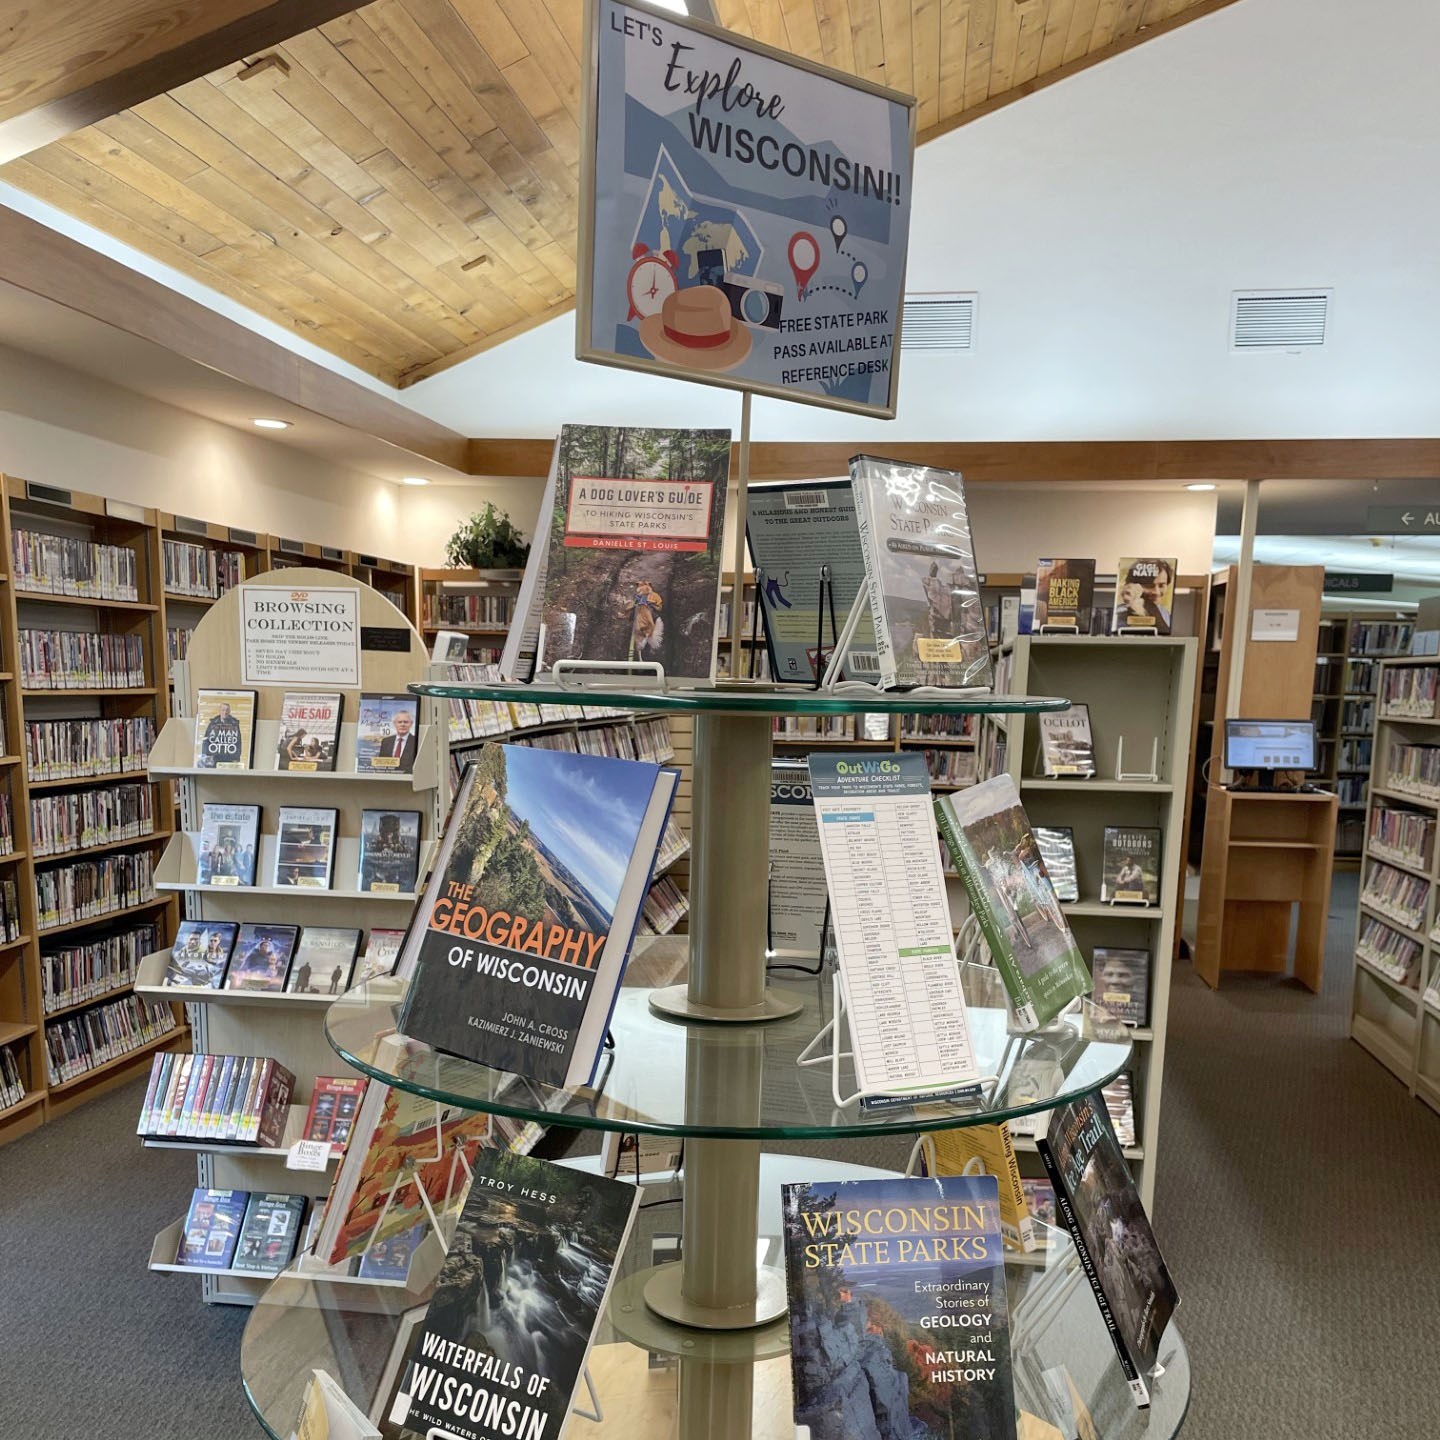 A display shelf with glass tiers of books, DVD's and information cards about Wisconsin recreation inside Elm Grove Public Library.